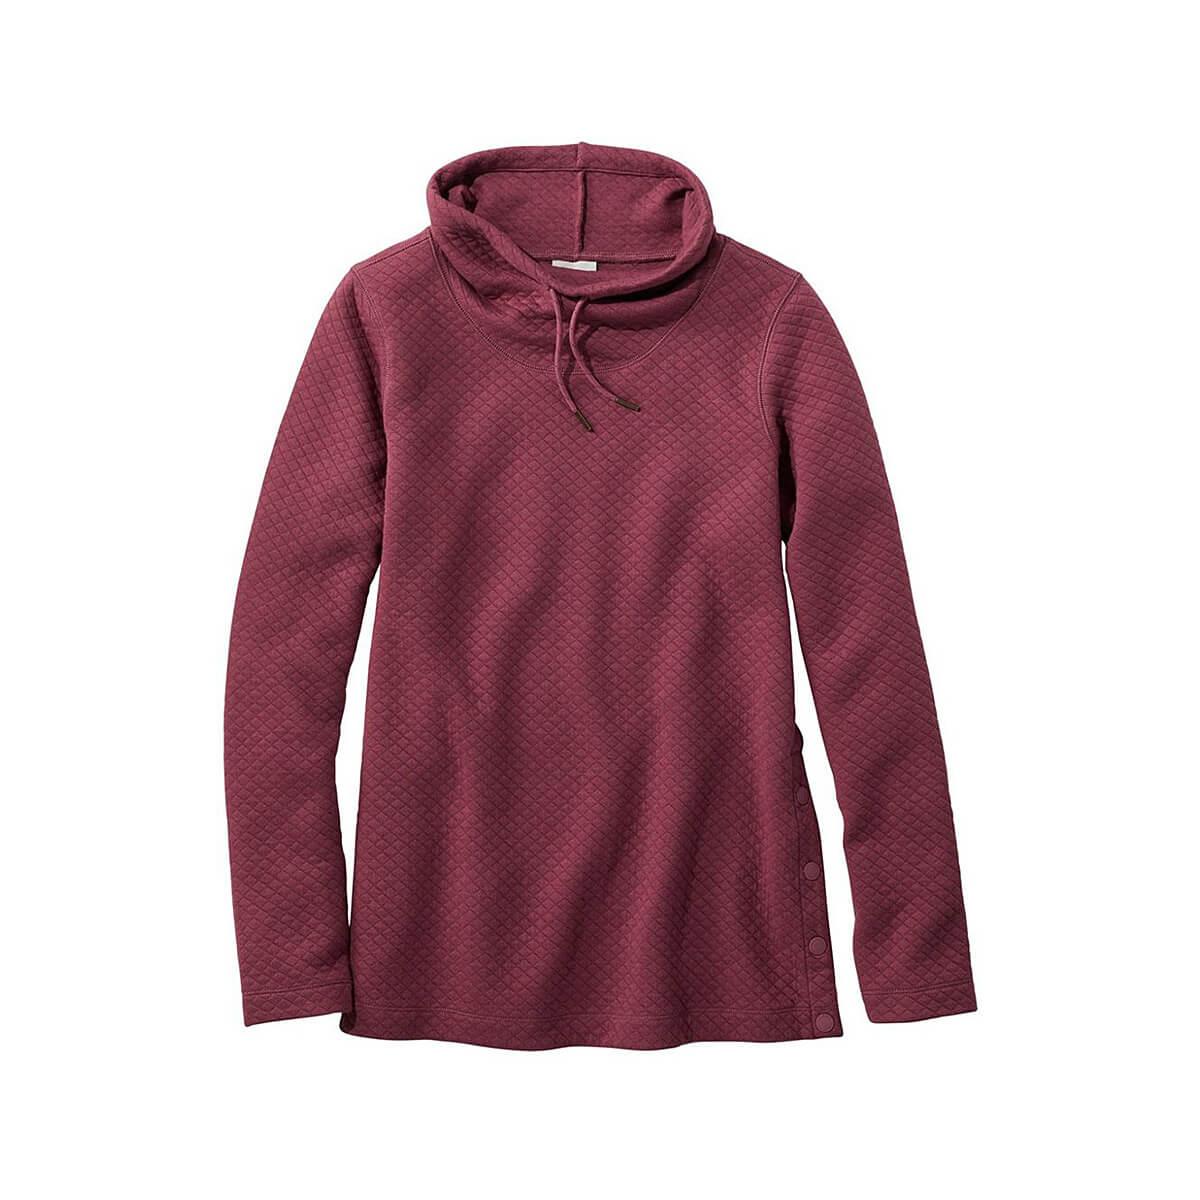 Mast General Store | Women's Long Sleeve SoftLight Quilted Funnel Neck ...